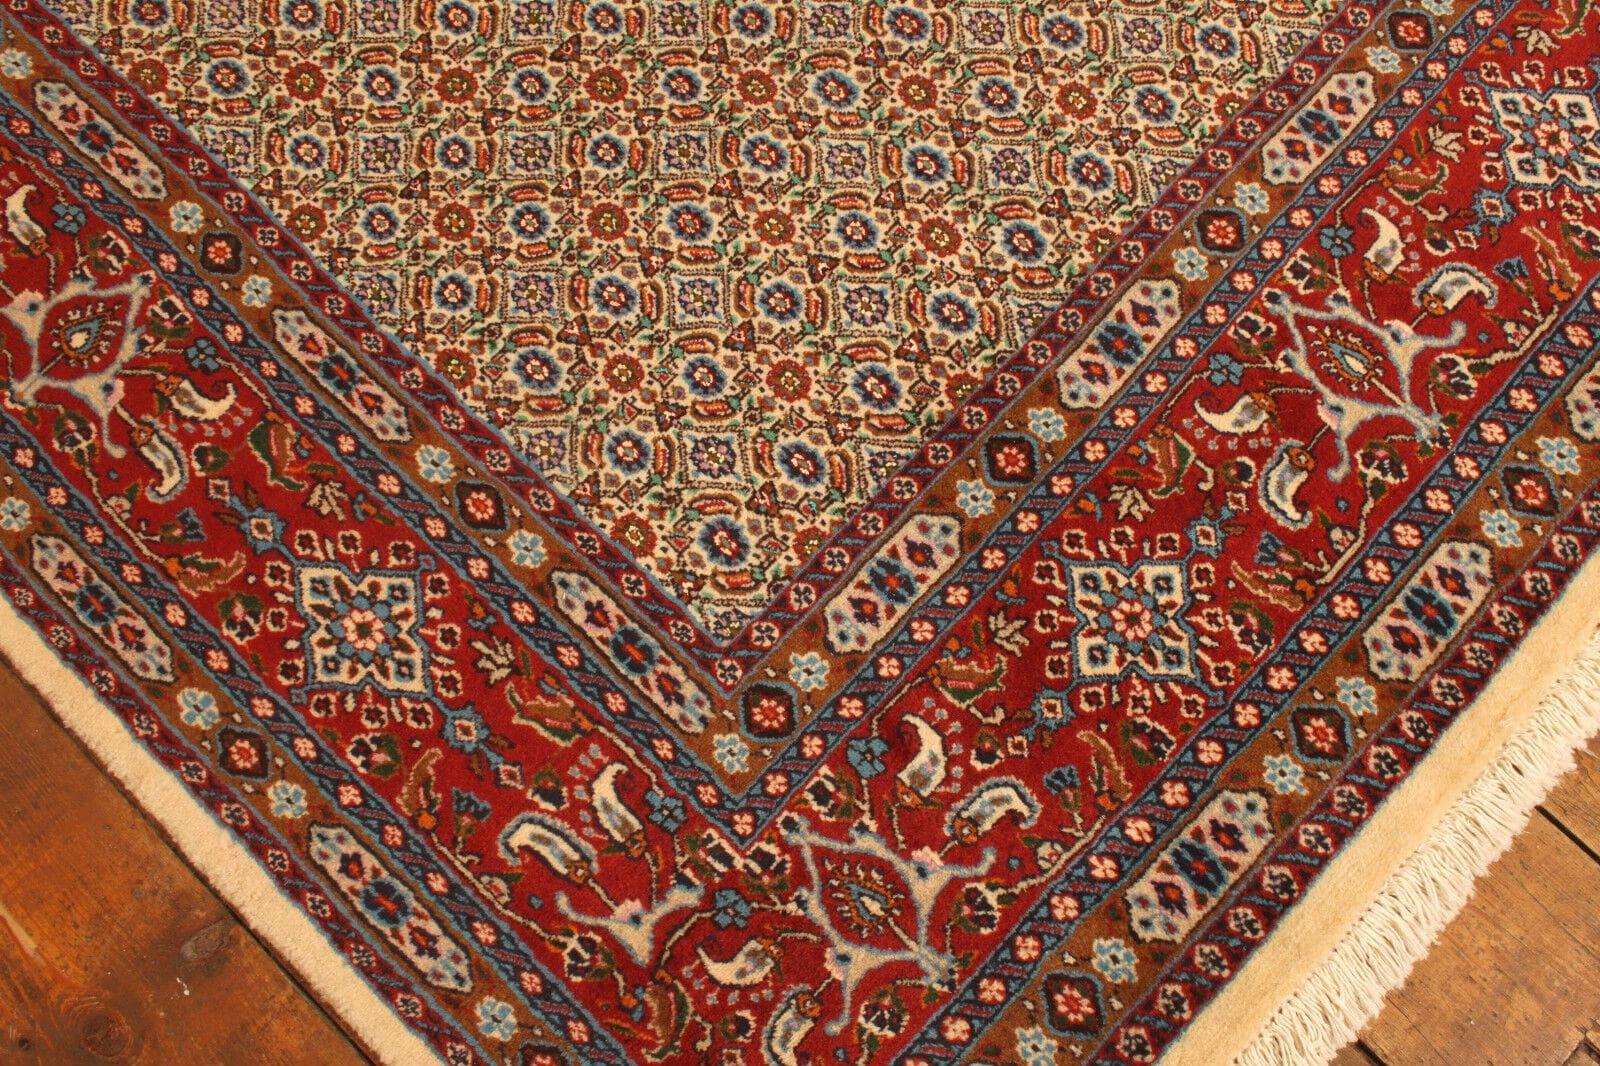 Handmade Vintage Indian Mahal Rug 6.3' x 9.8', 1970s - 1T30 In Good Condition For Sale In Bordeaux, FR